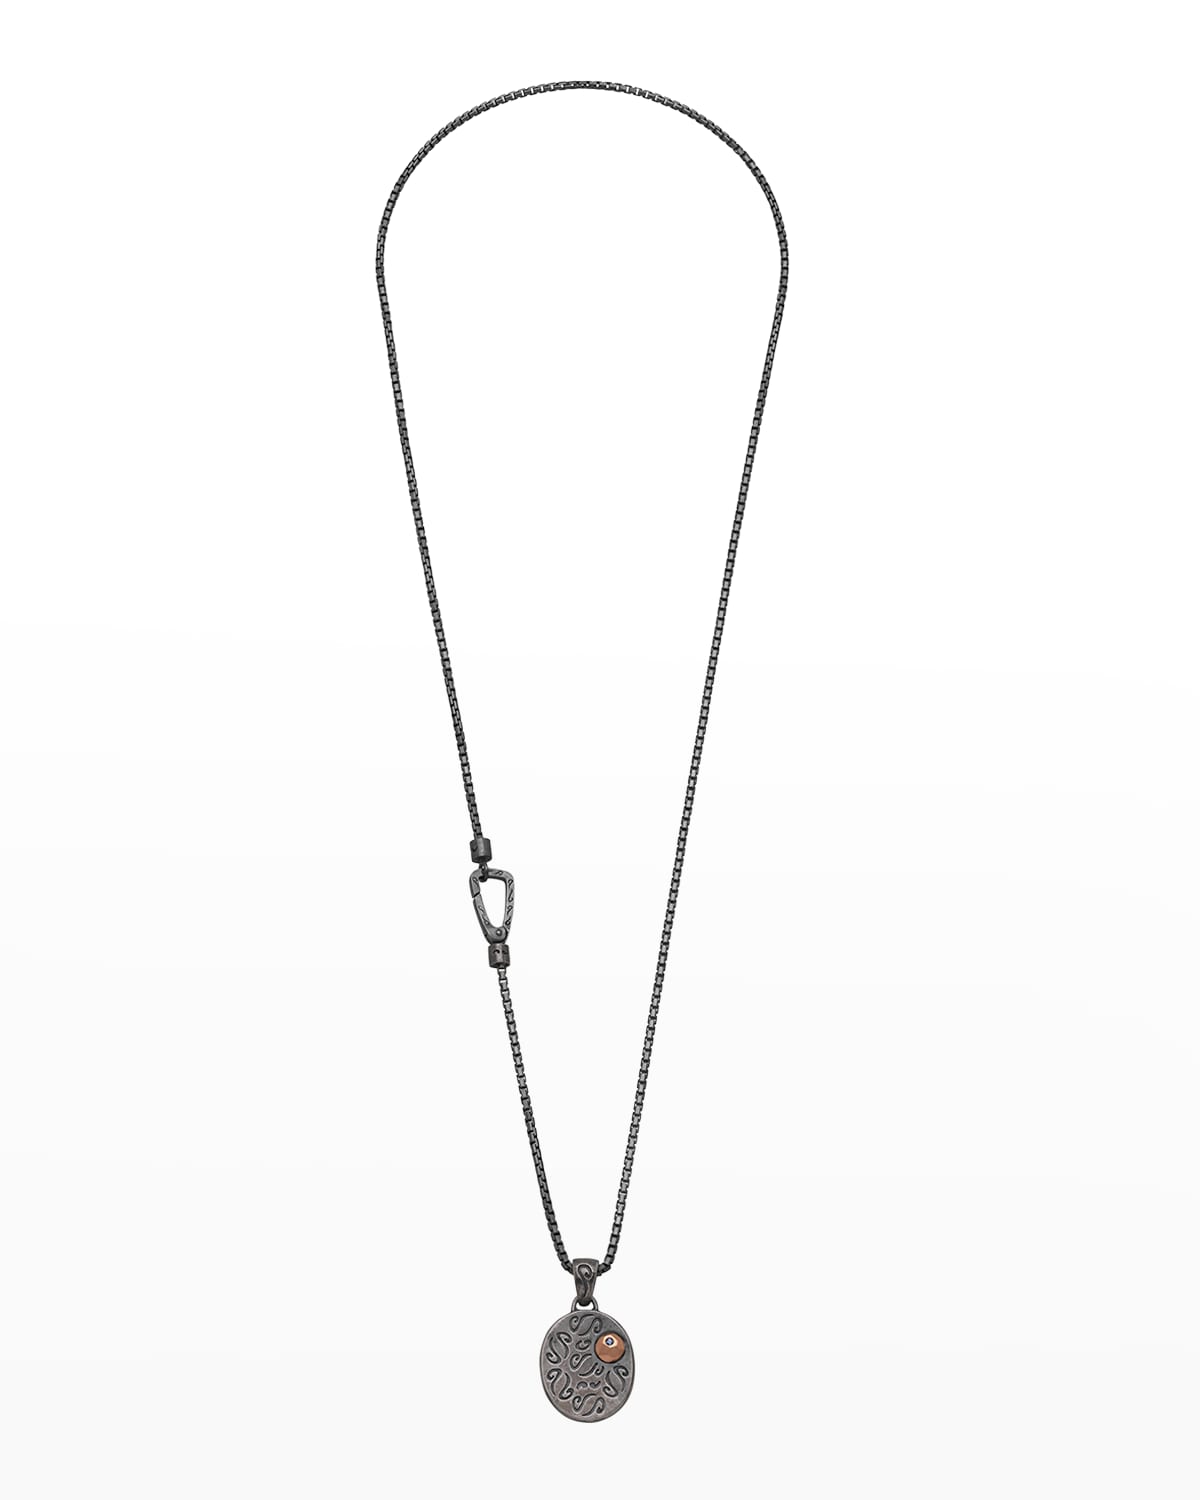 Marco Dal Maso Oxidized Silver & 18k Rose Gold Pendant With Blue Sapphire